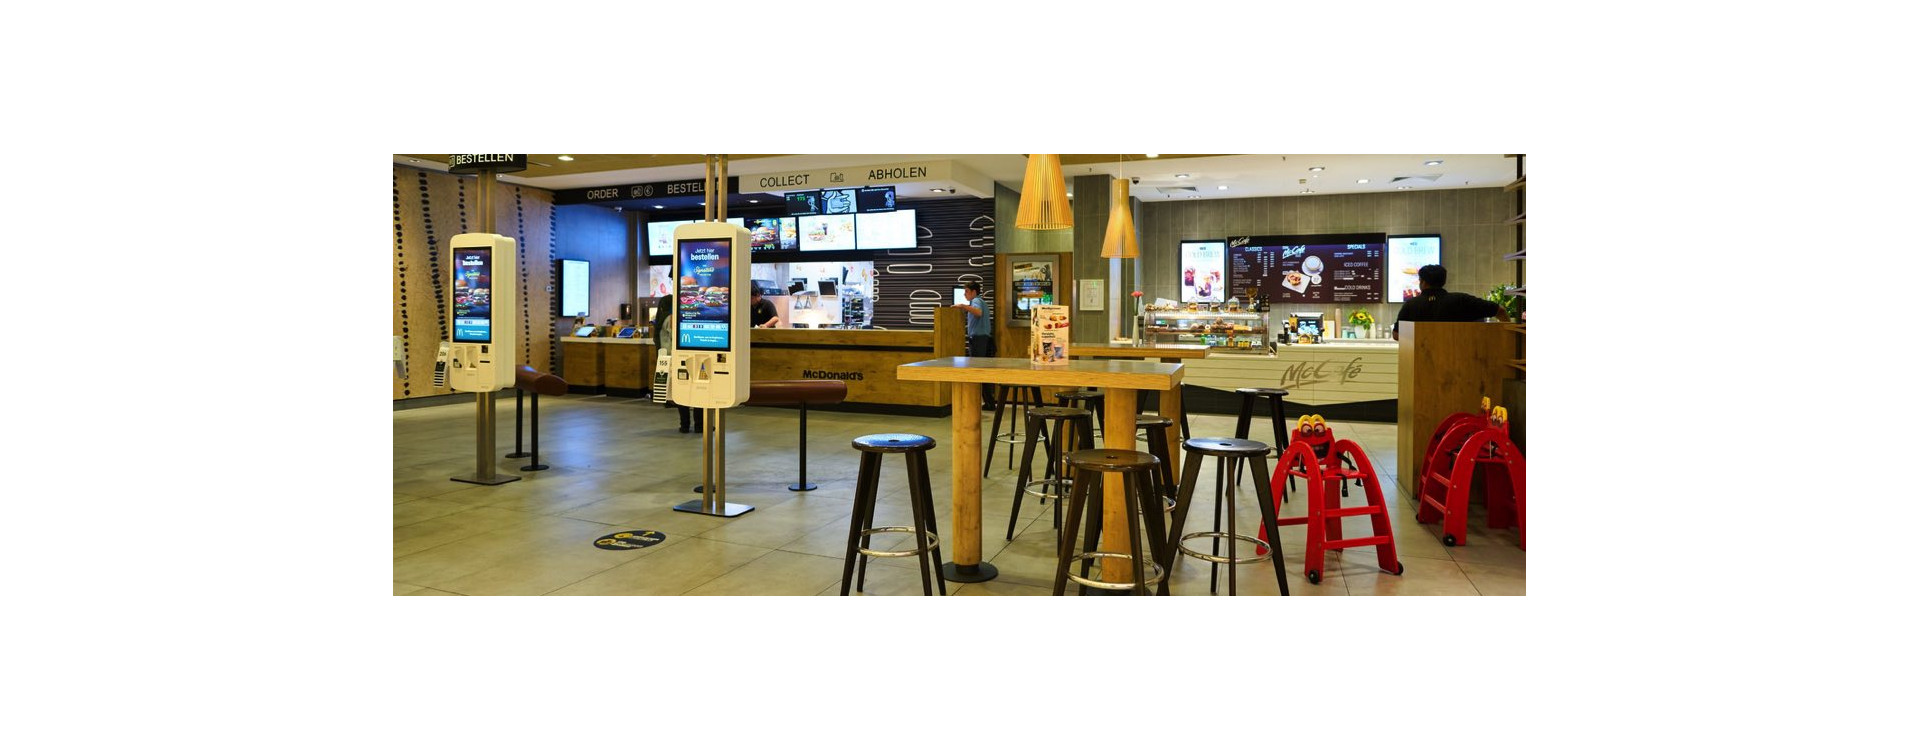 How are order kiosks revolutionizing the dining experience in Canada?